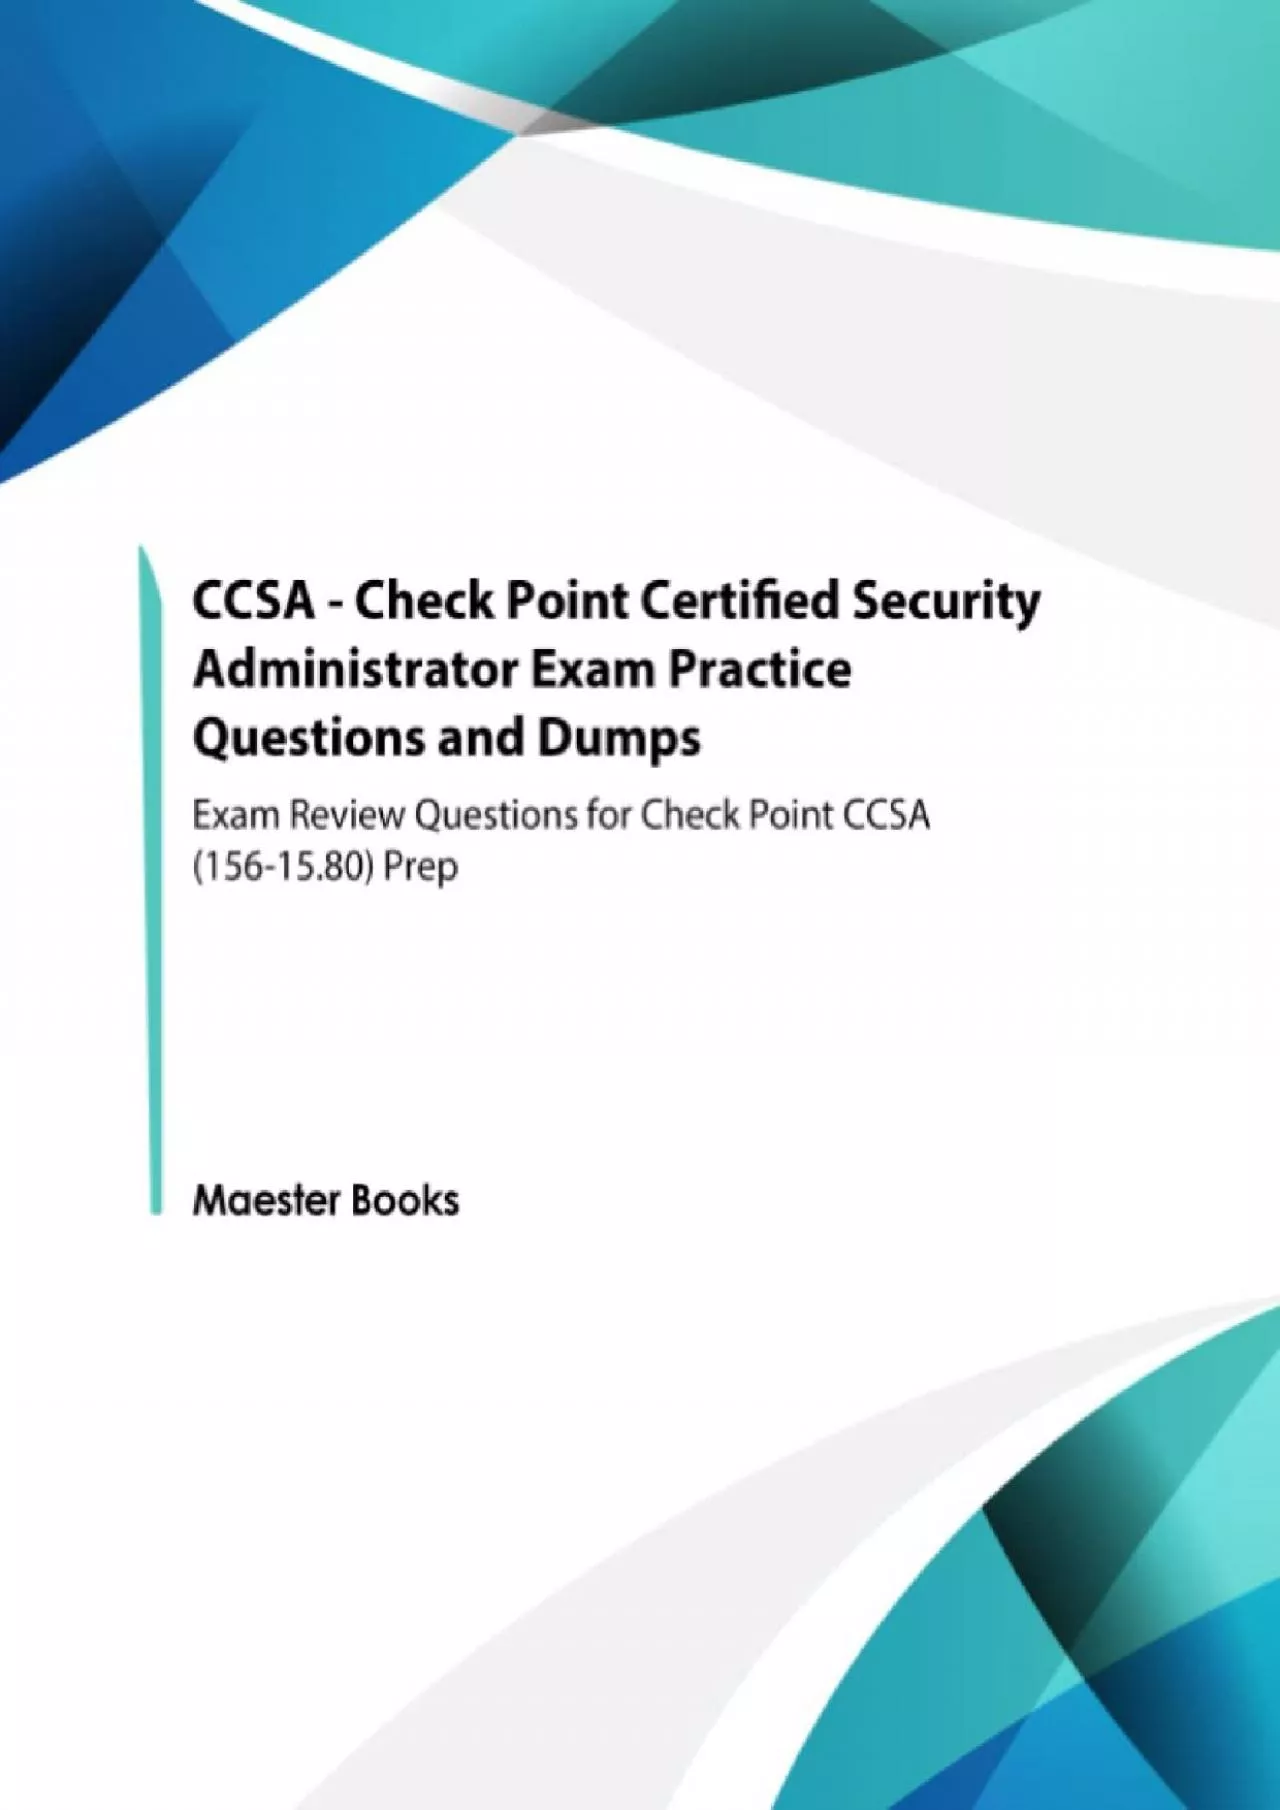 [PDF]-CCSA - Check Point Certified Security Administrator Exam Practice Questions and